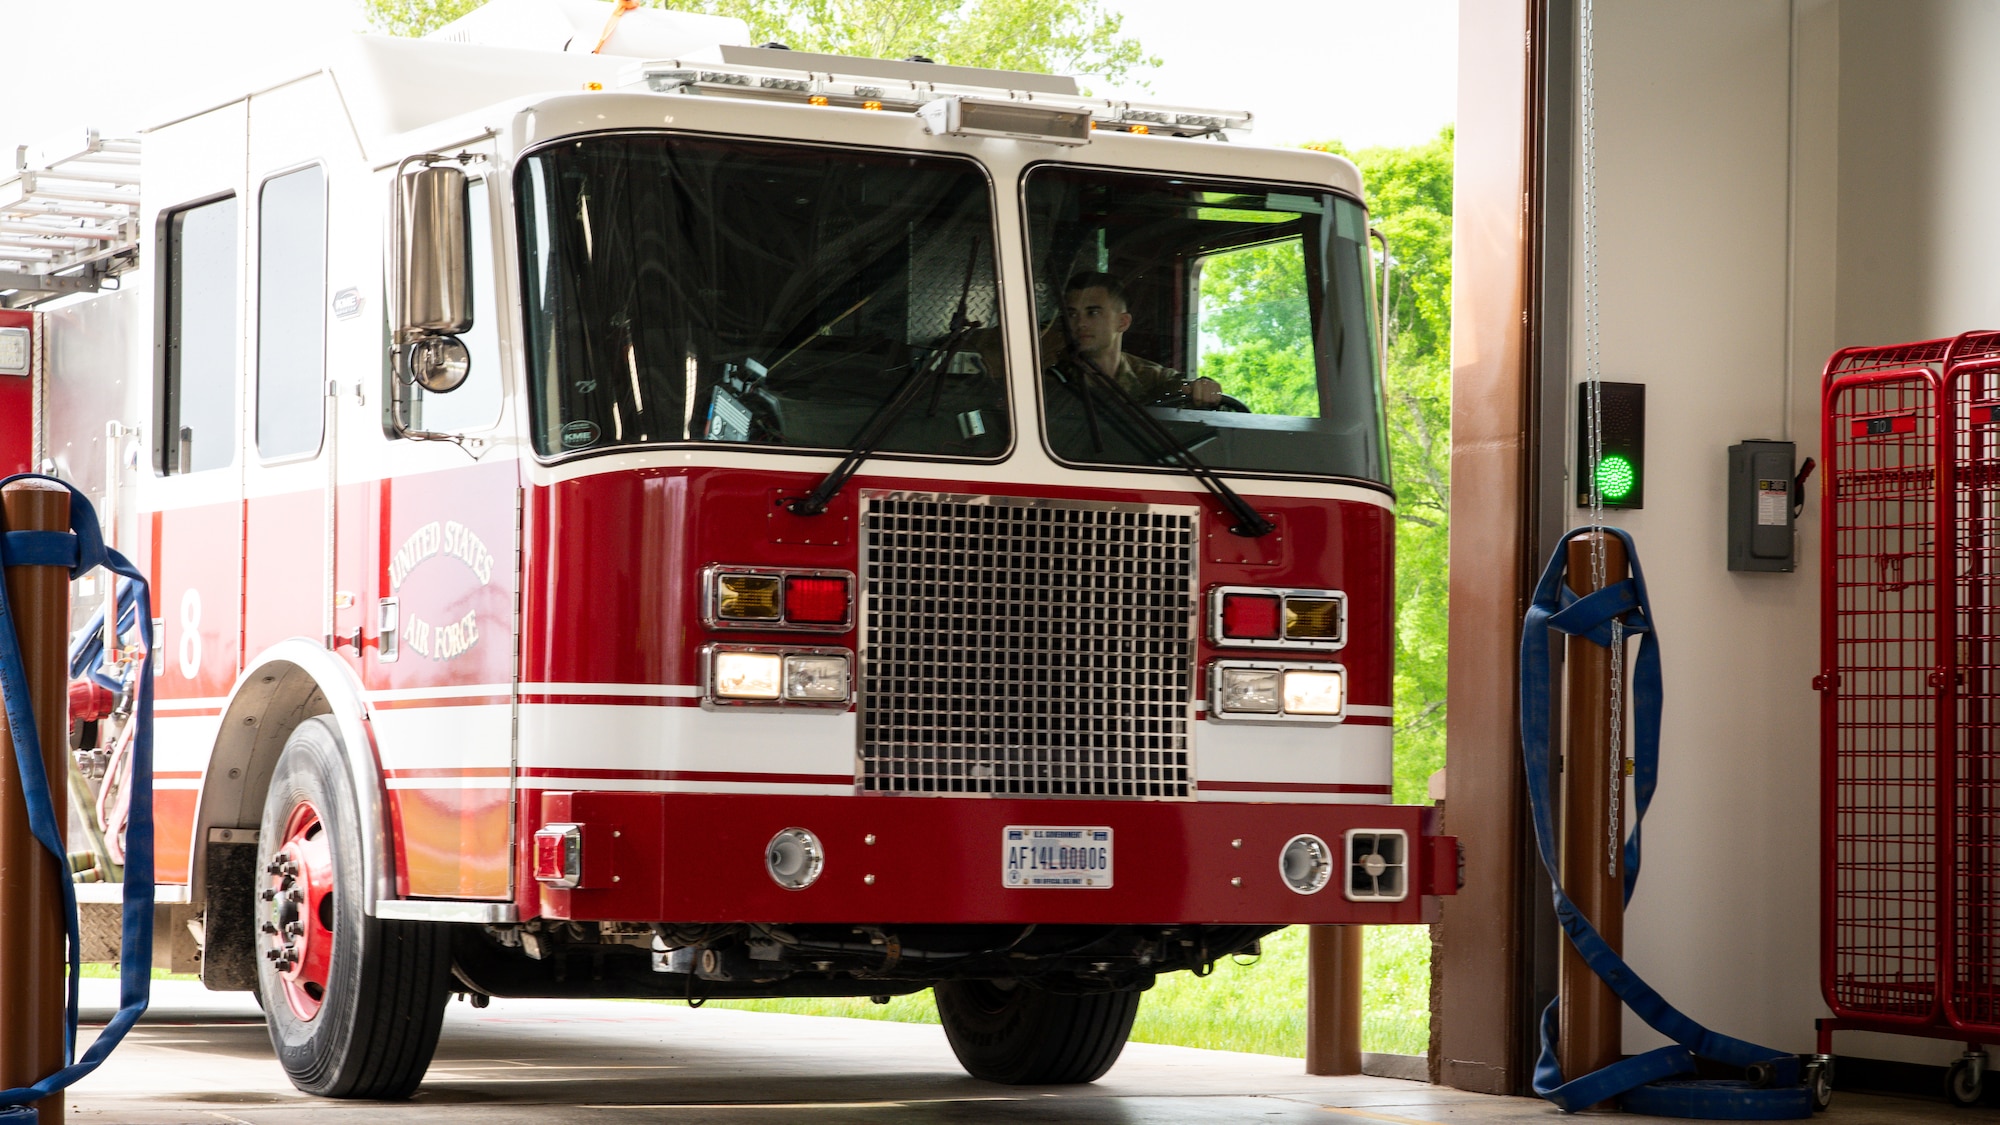 Senior Airman Tristen Frey, 2nd Civil Engineer Squadron firefighter, drives a fire truck into the newly opened Fire Station Two truck bay at Barksdale Air Force Base, Louisiana, April 7, 2021.